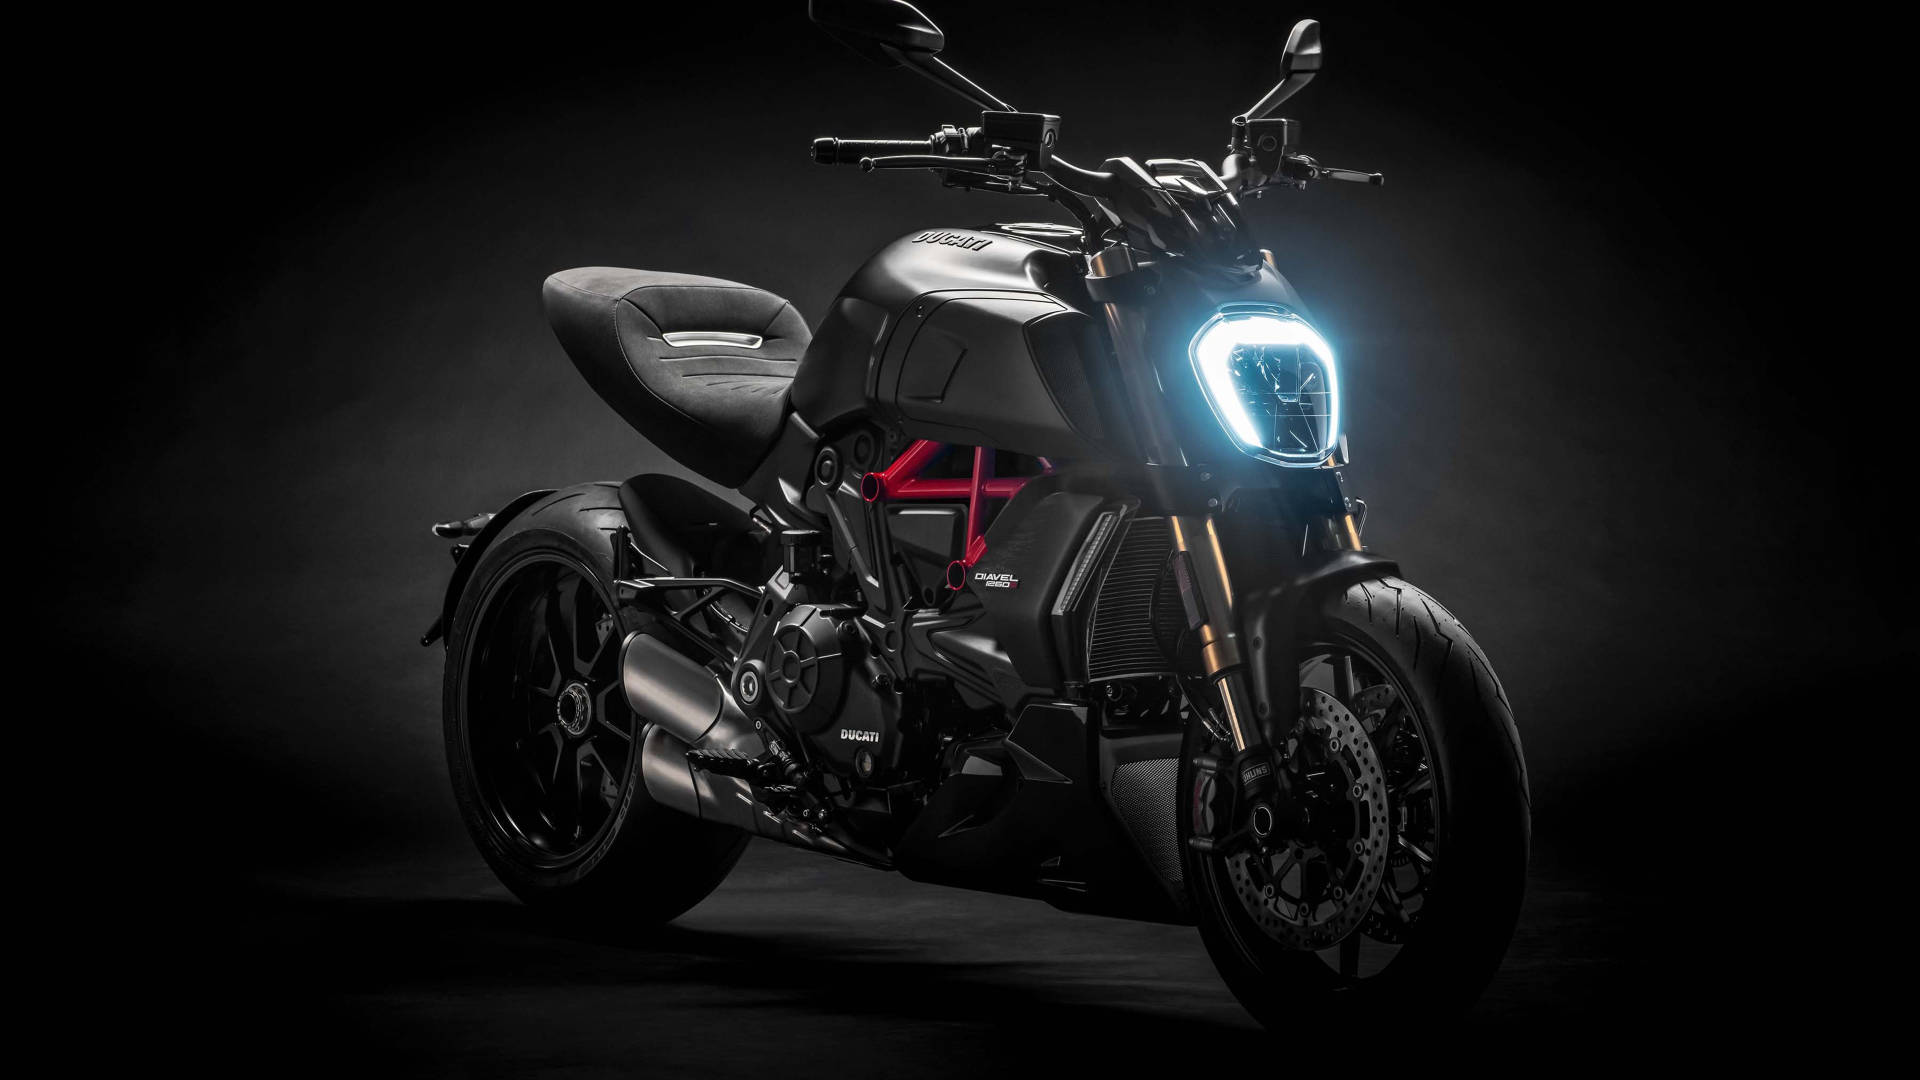 Image Cruise The Streets With A Ducati Diavel 1260 S